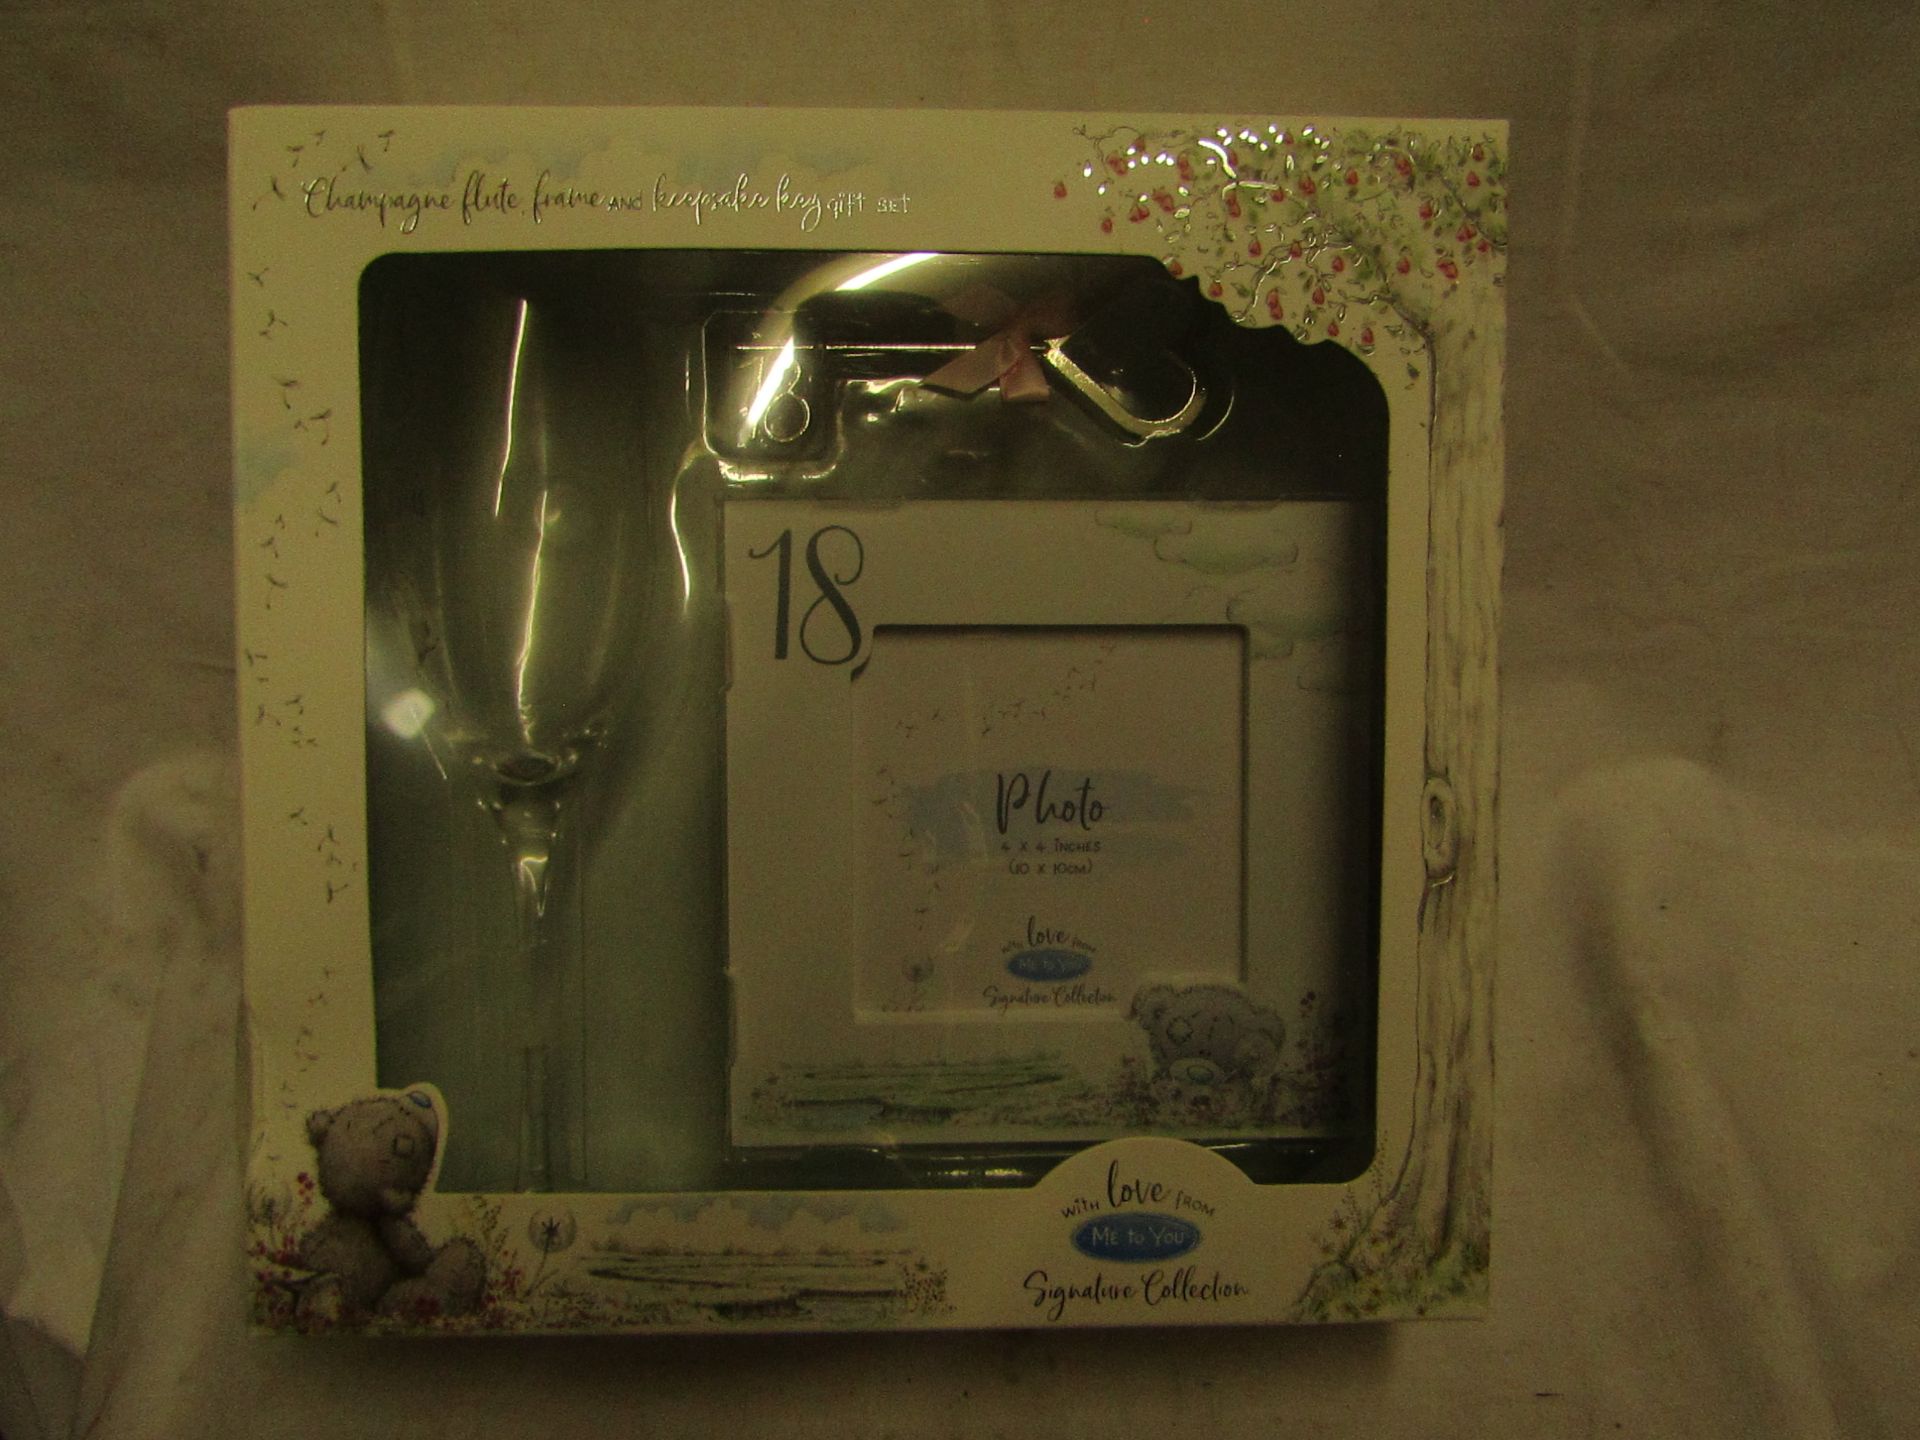 Gift Set Containing Champange Flute Key & Photo Frame 4 X 4 " For 18th Birthdat Packaged